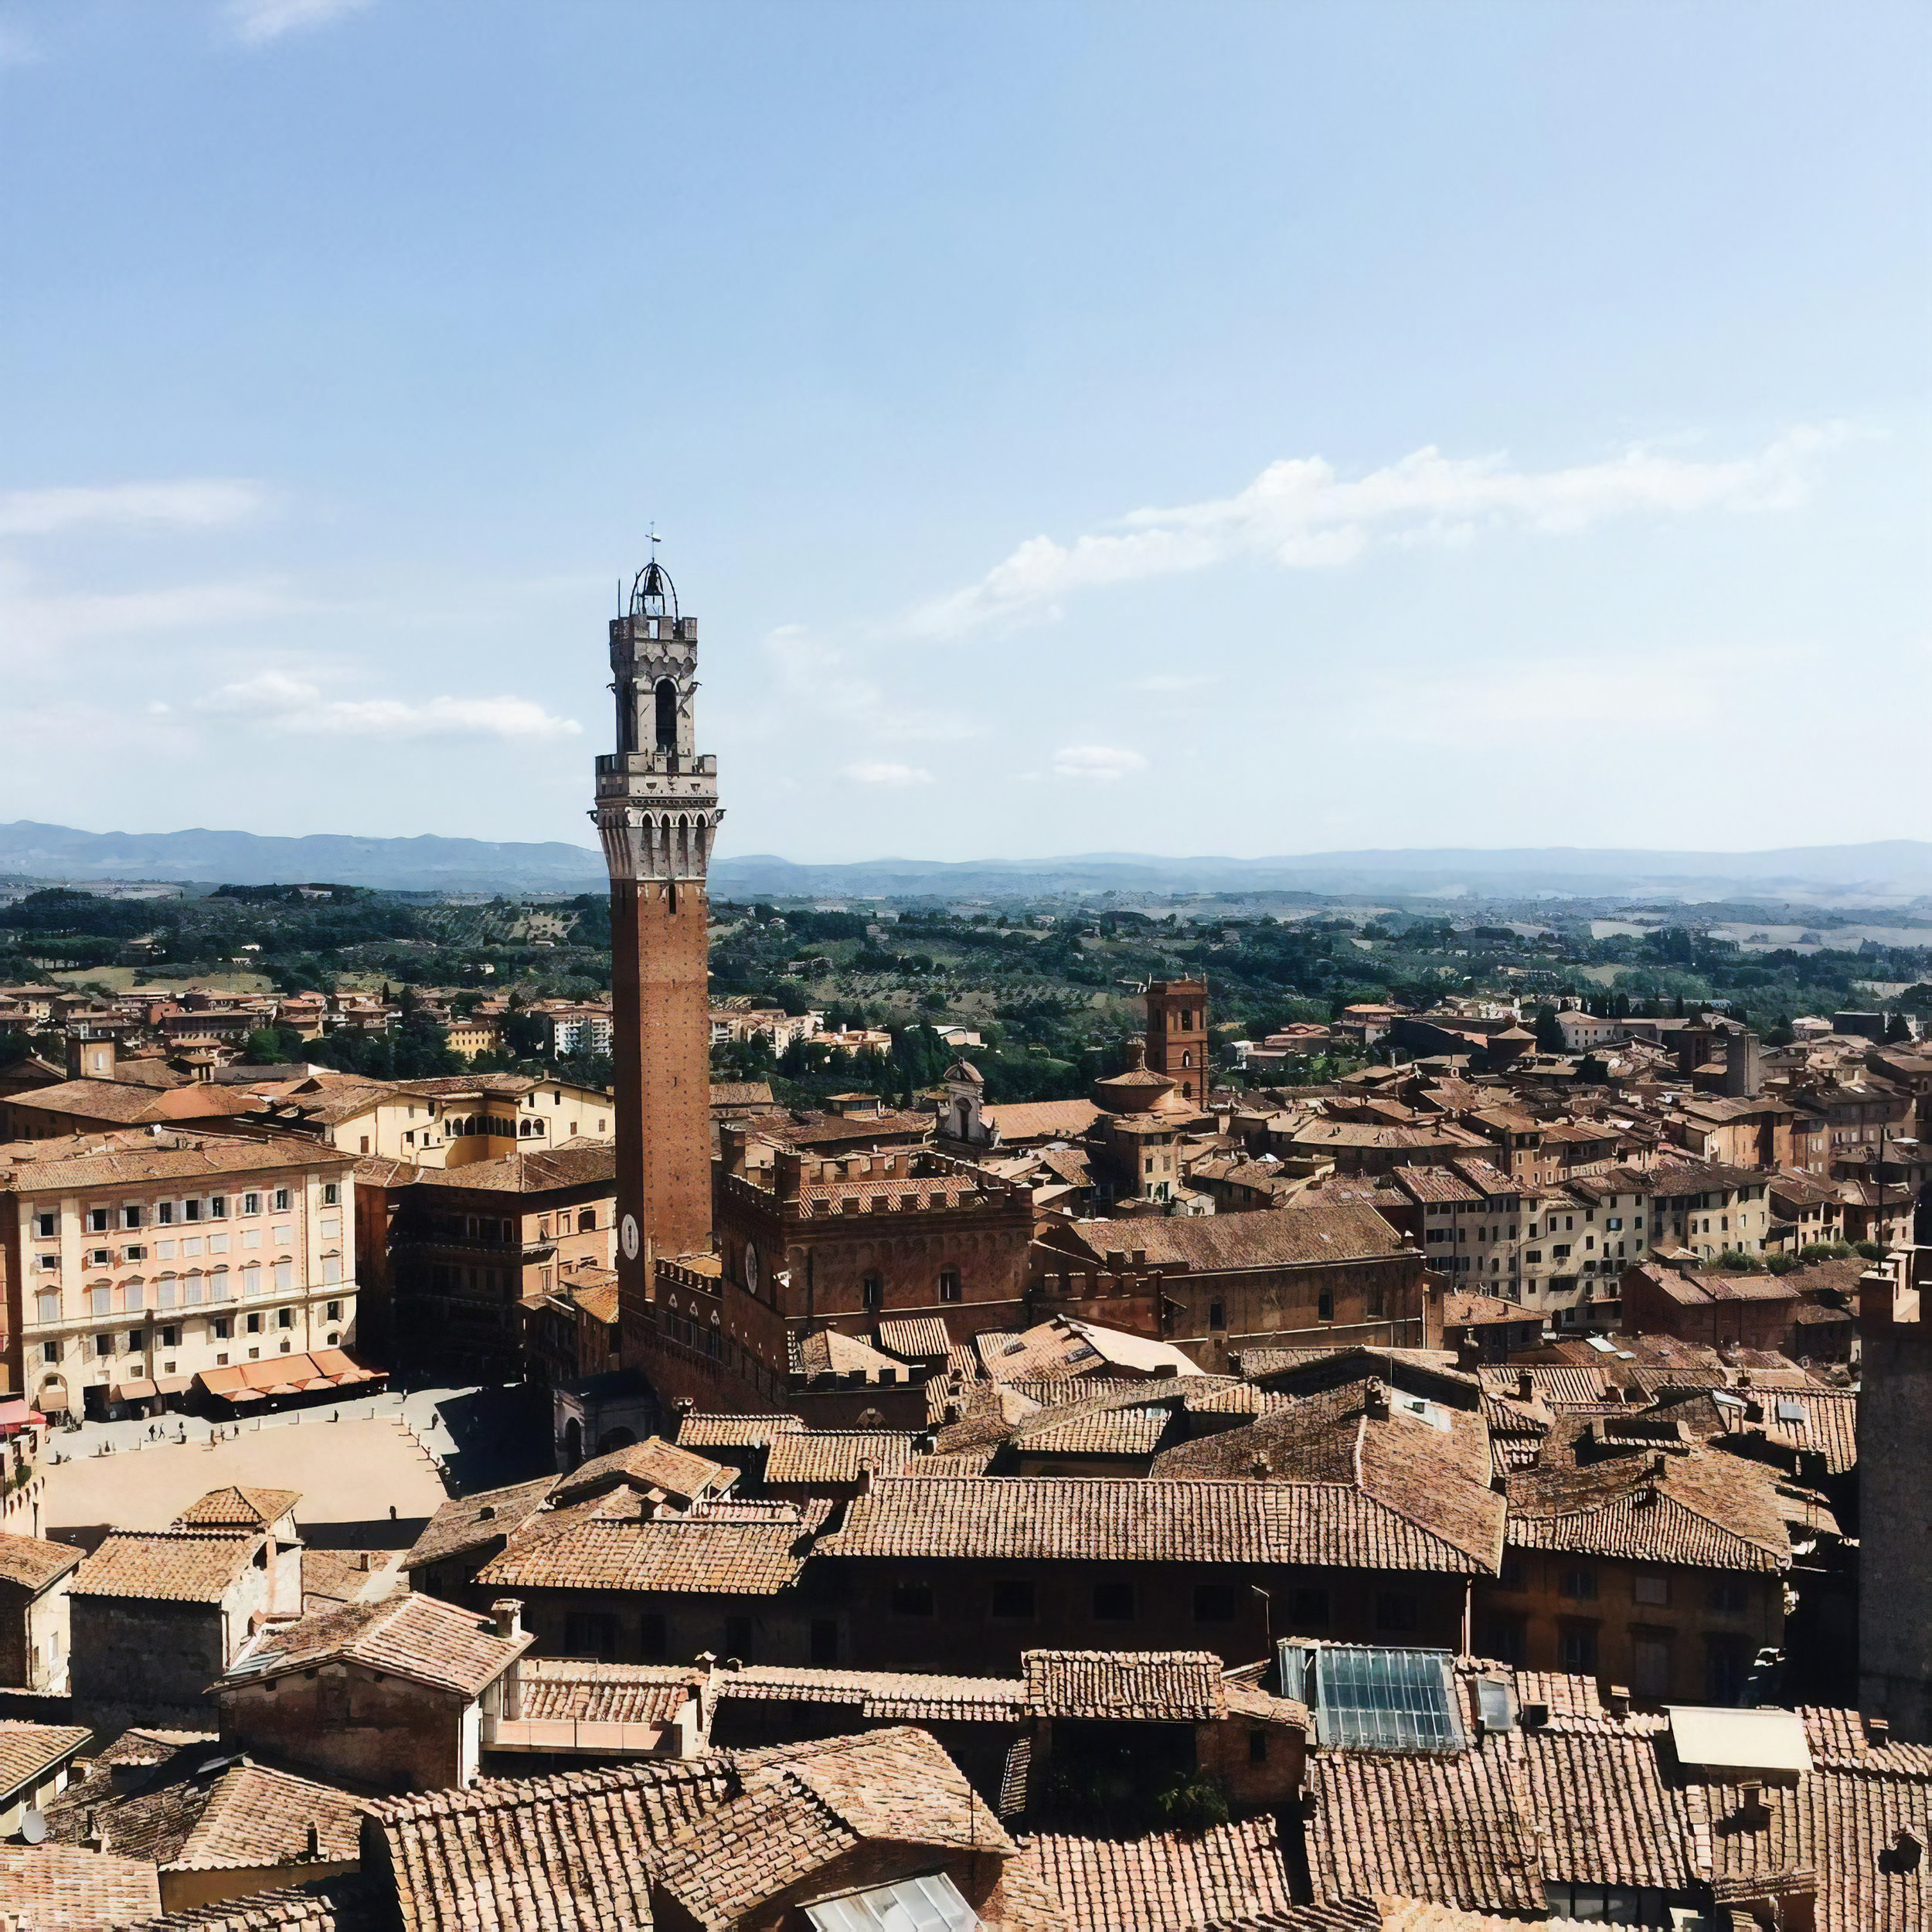  The view from the top of the Duomo in Siena, Italy 